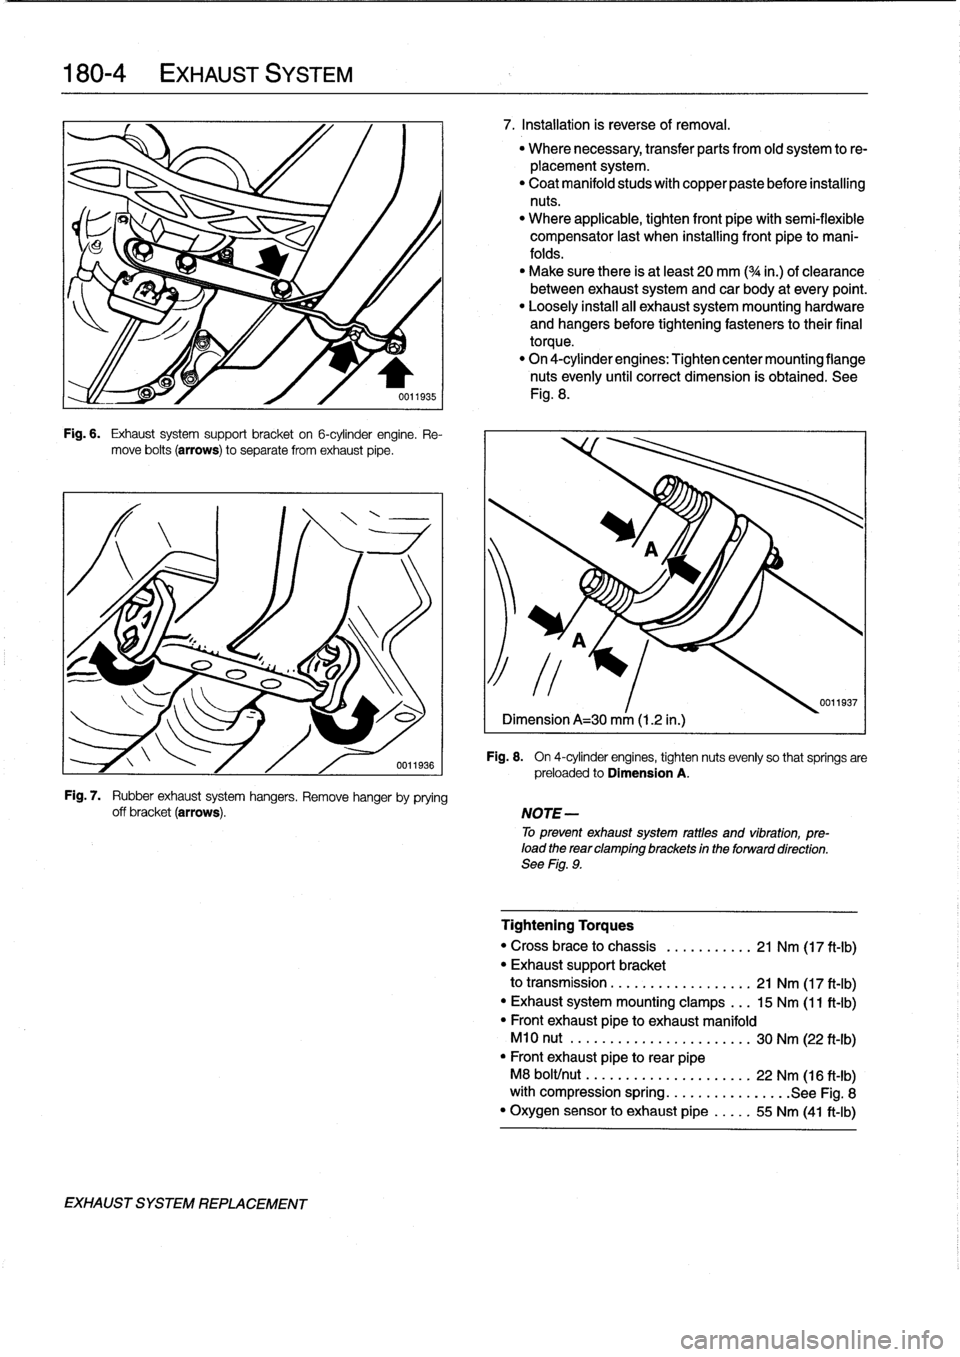 BMW 318i 1992 E36 Workshop Manual 
180-
4

	

EXHAUST
SYSTEM

Fig
.
6
.

	

Exhaust
system
support
bracket
on
6-cylinder
engine
.
Re-
move
bolts
(arrows)
to
separate
from
exhaust
pipe
.

Fig
.
7
.

	

Rubber
exhaust
system
hangers
.
R